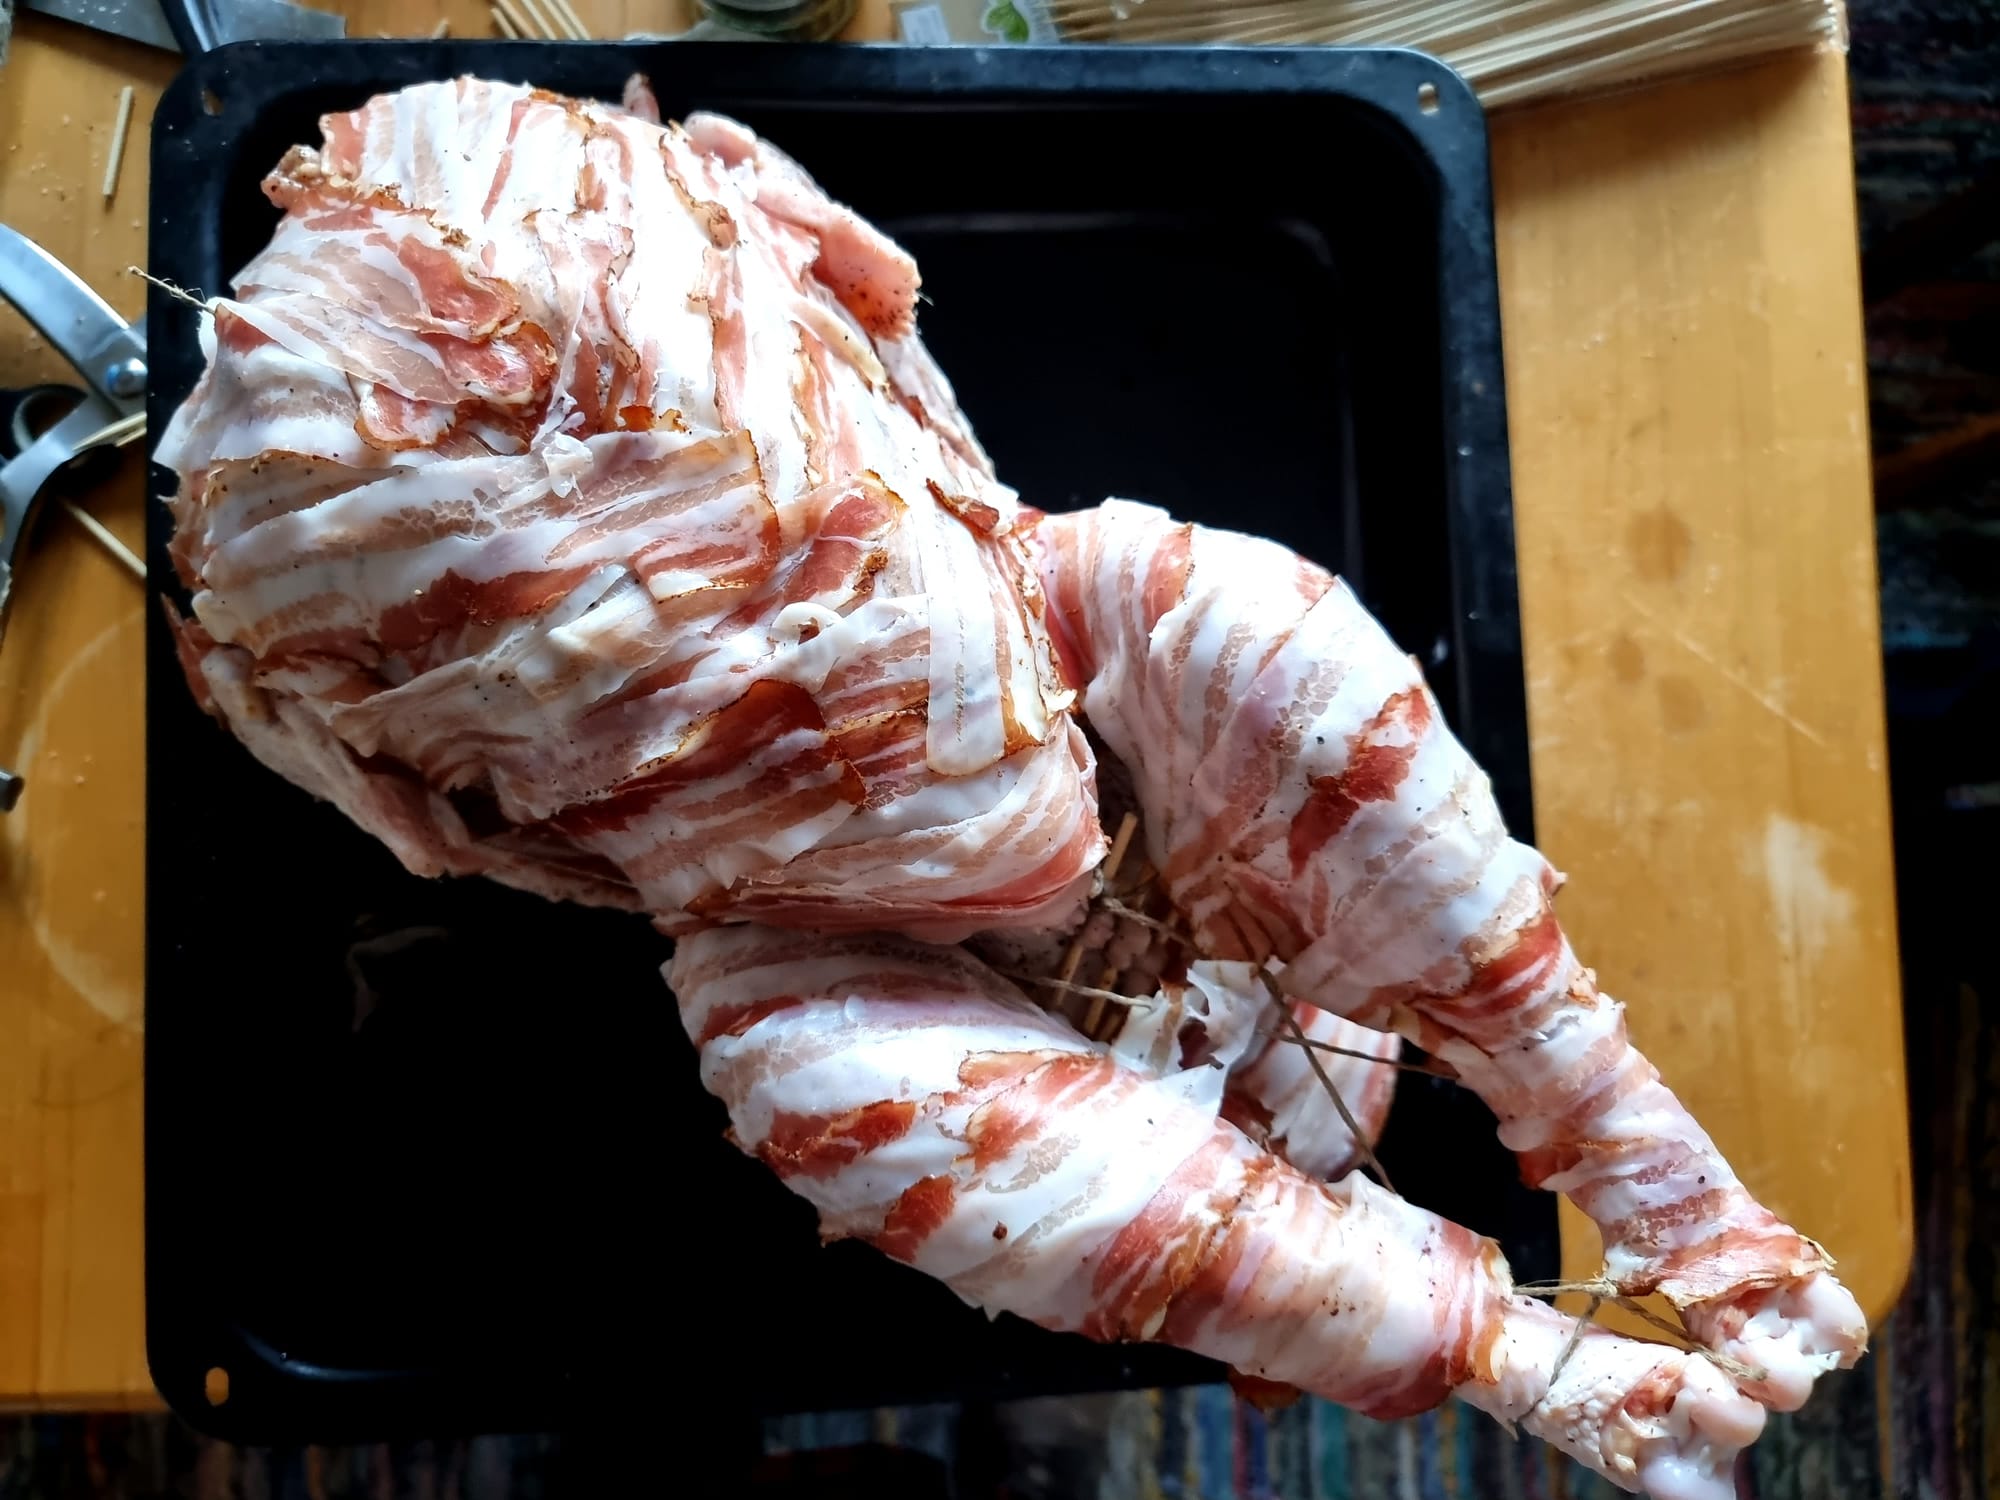 A raw and trussed turkey, dressed in bacon